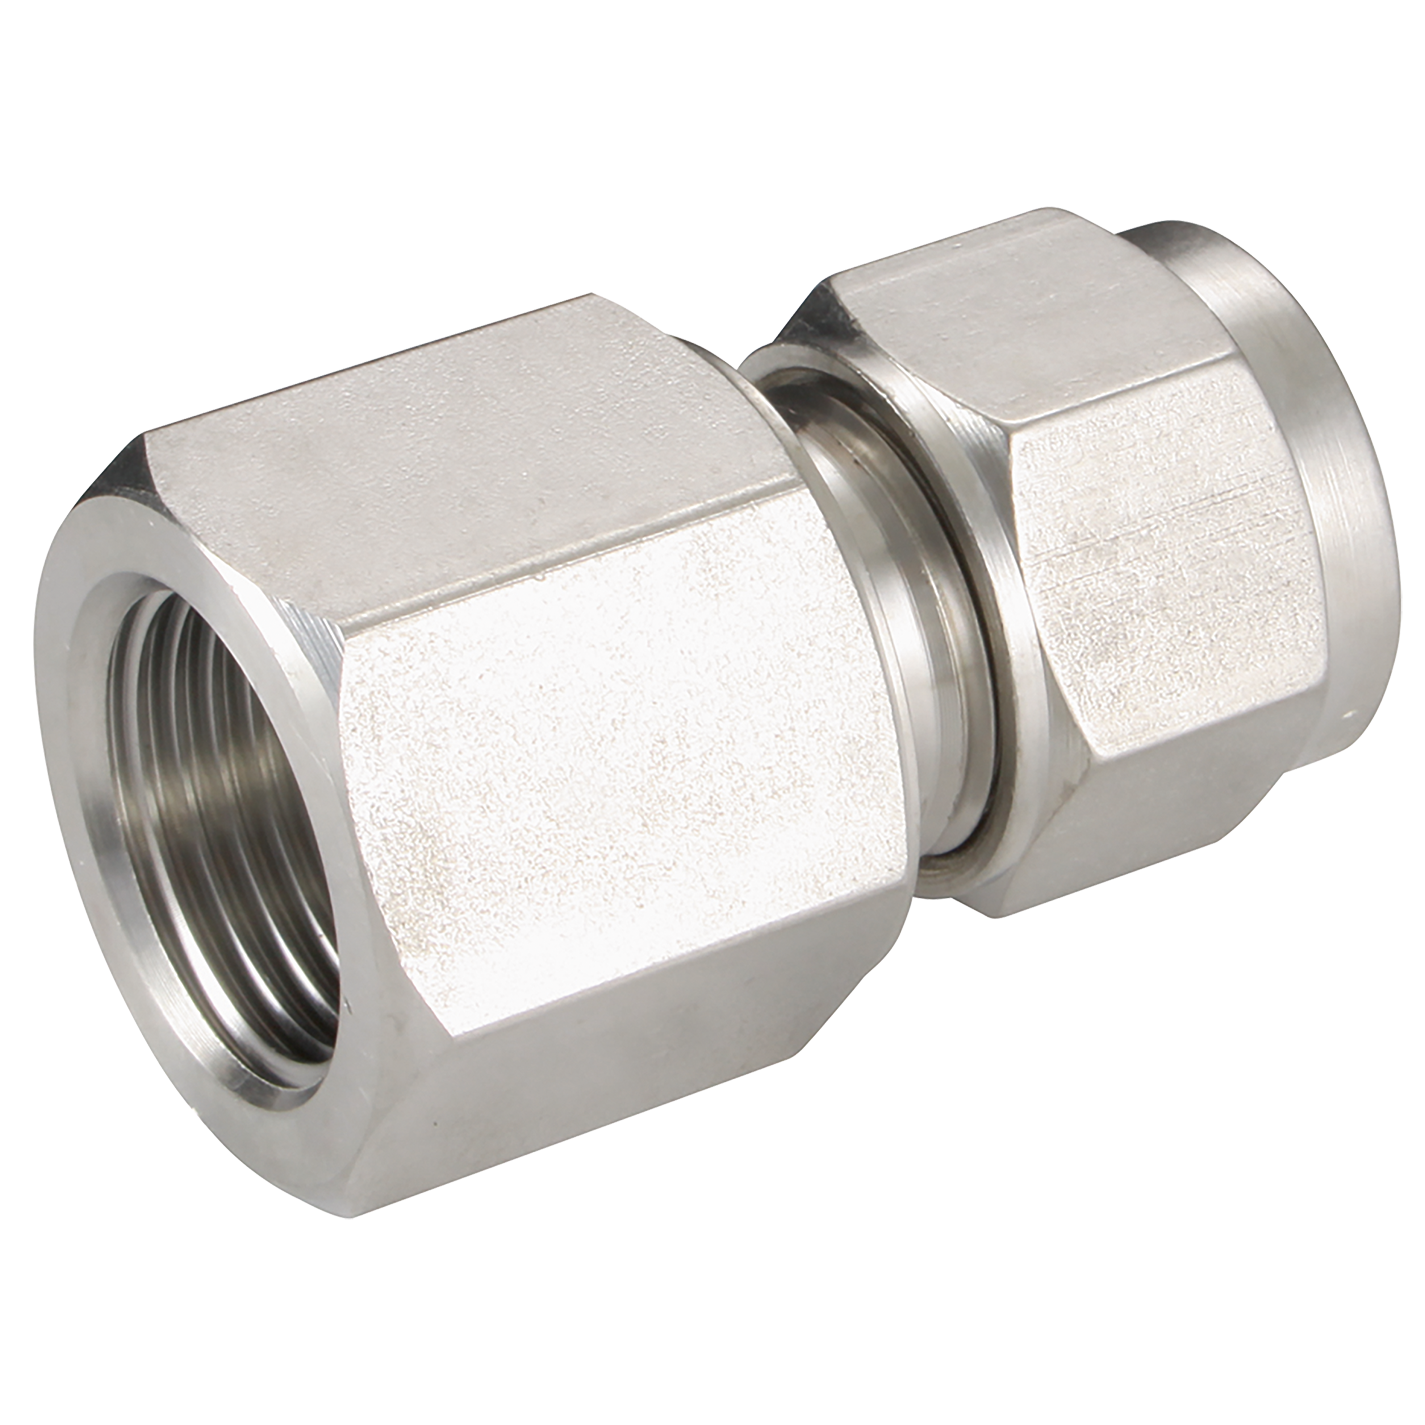 FEMALE CONNECTOR 12 OD 1/2 BSPP